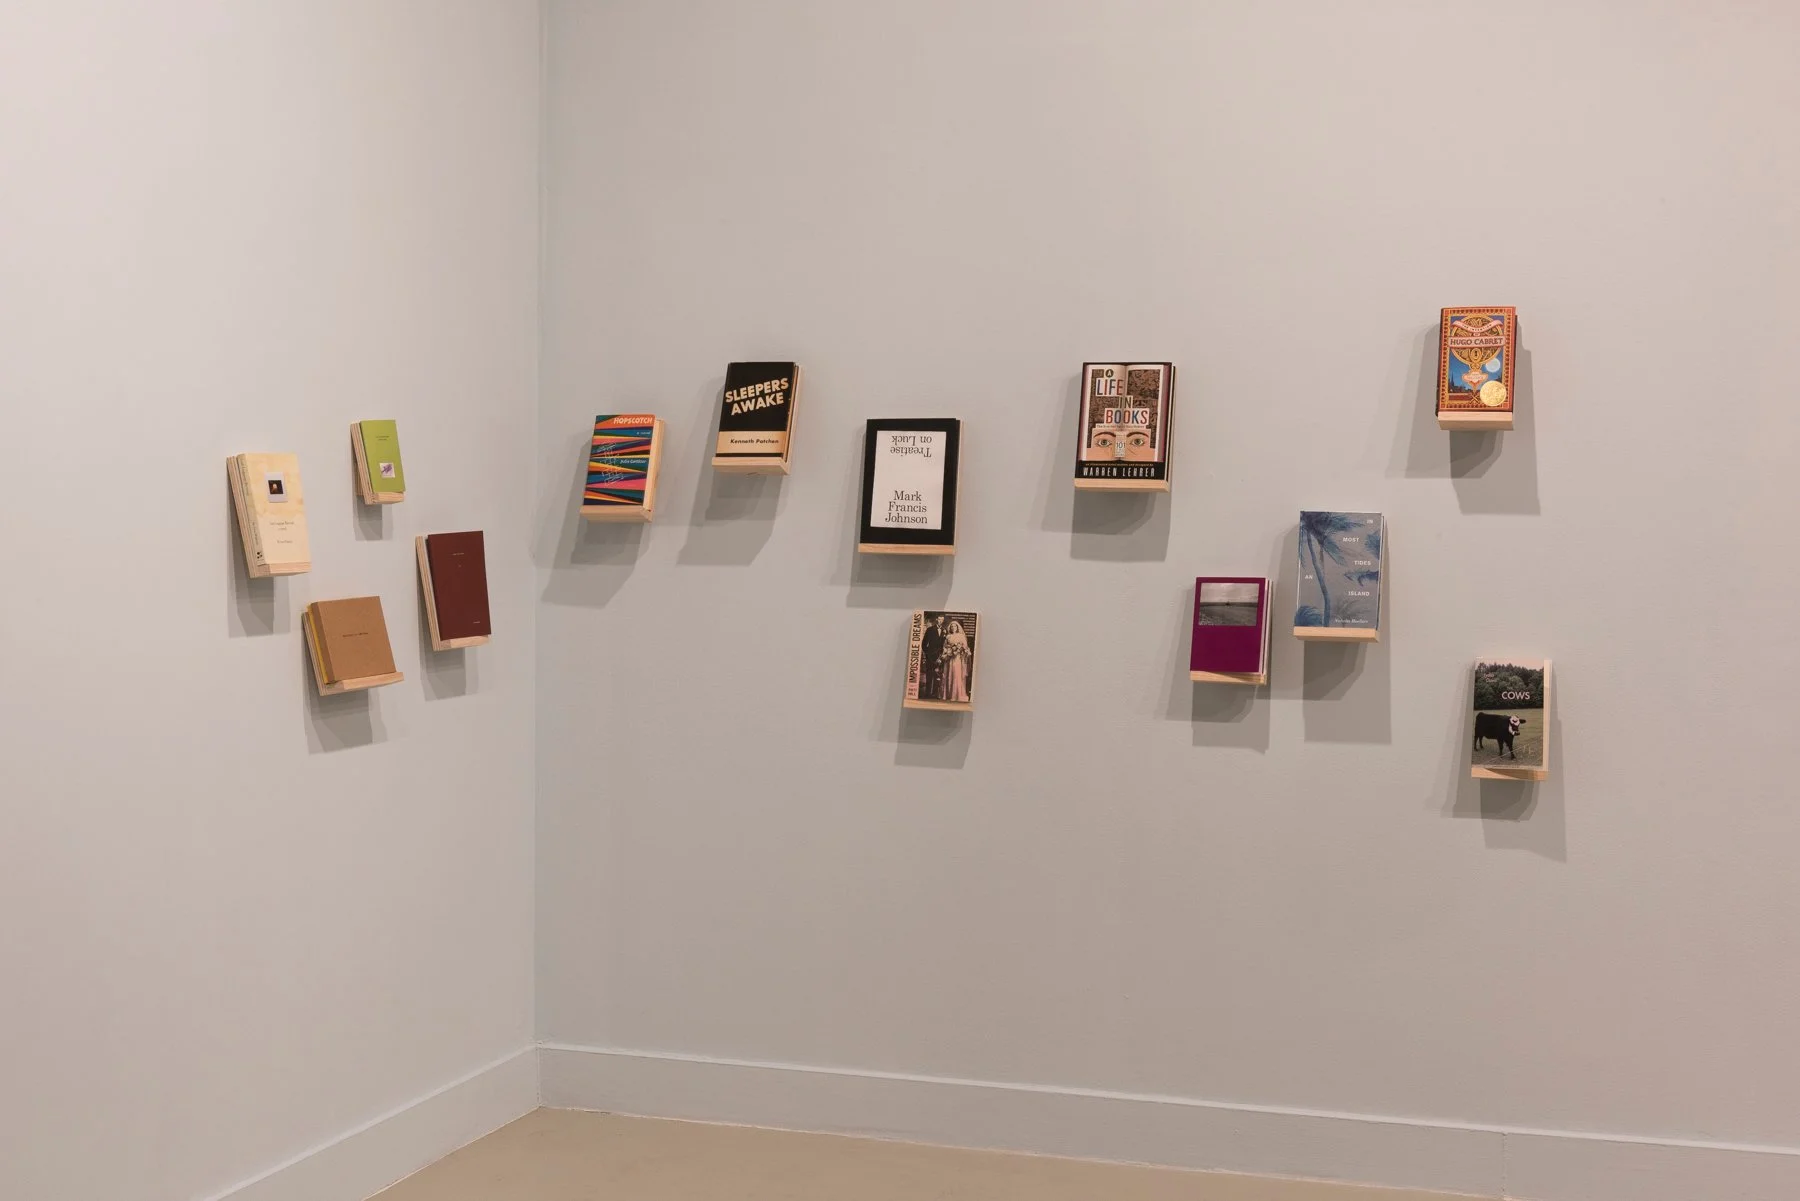 installation view from "Writers Making Books"